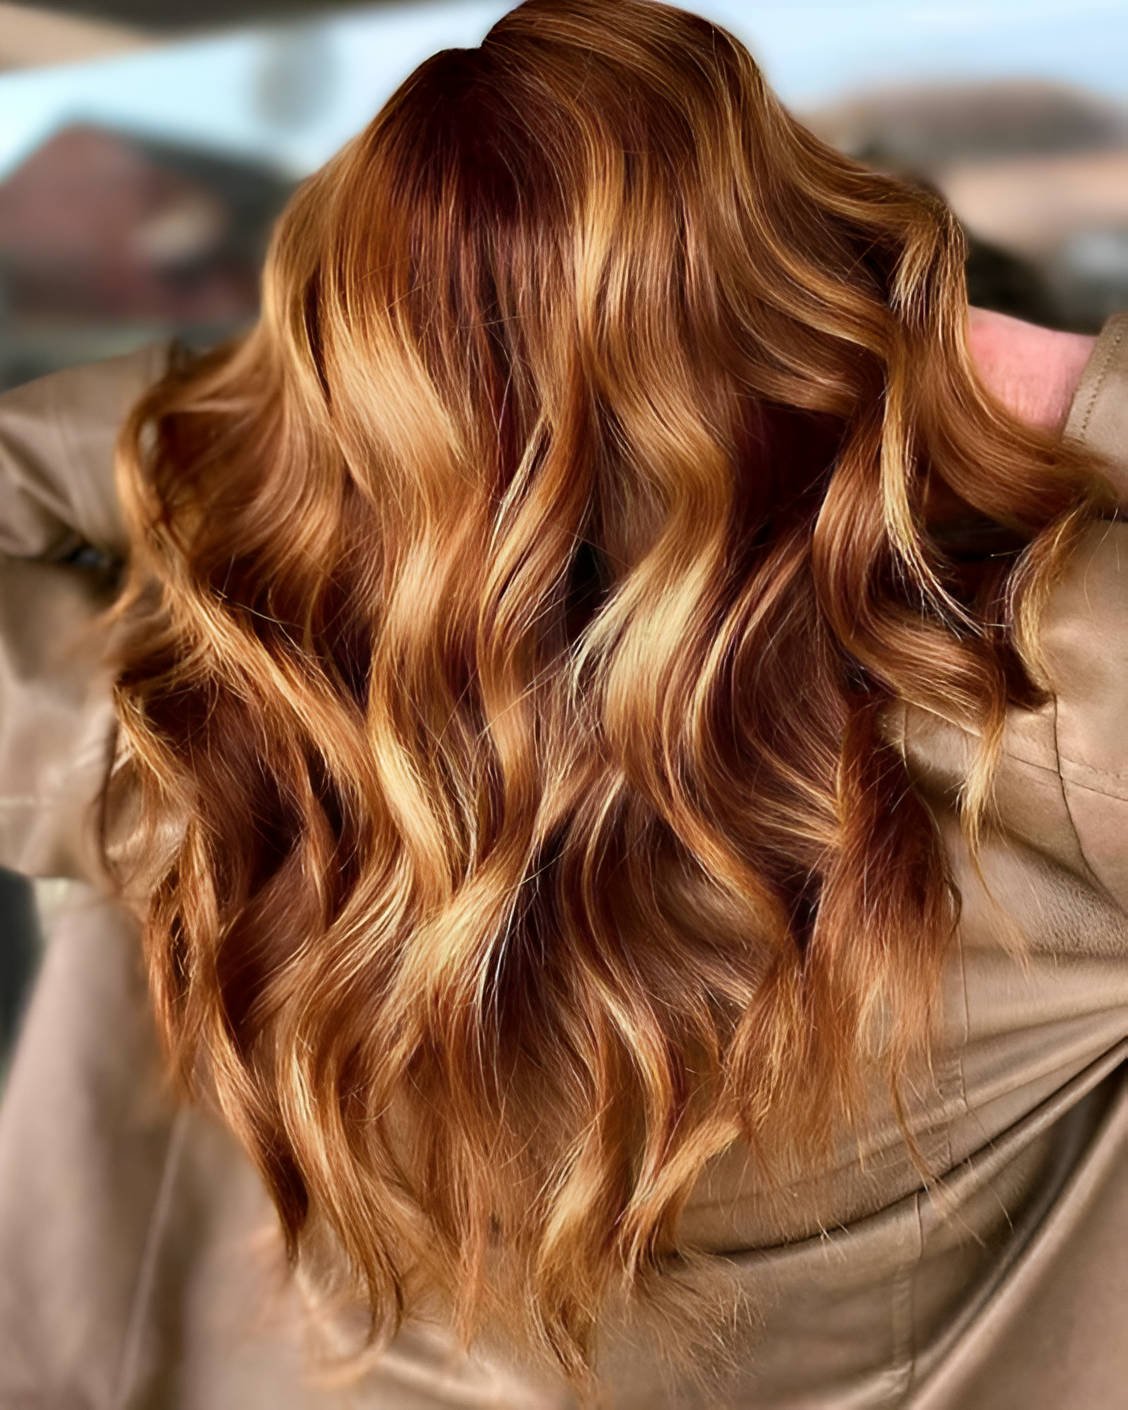 Carefree Curls With Caramel Highlights